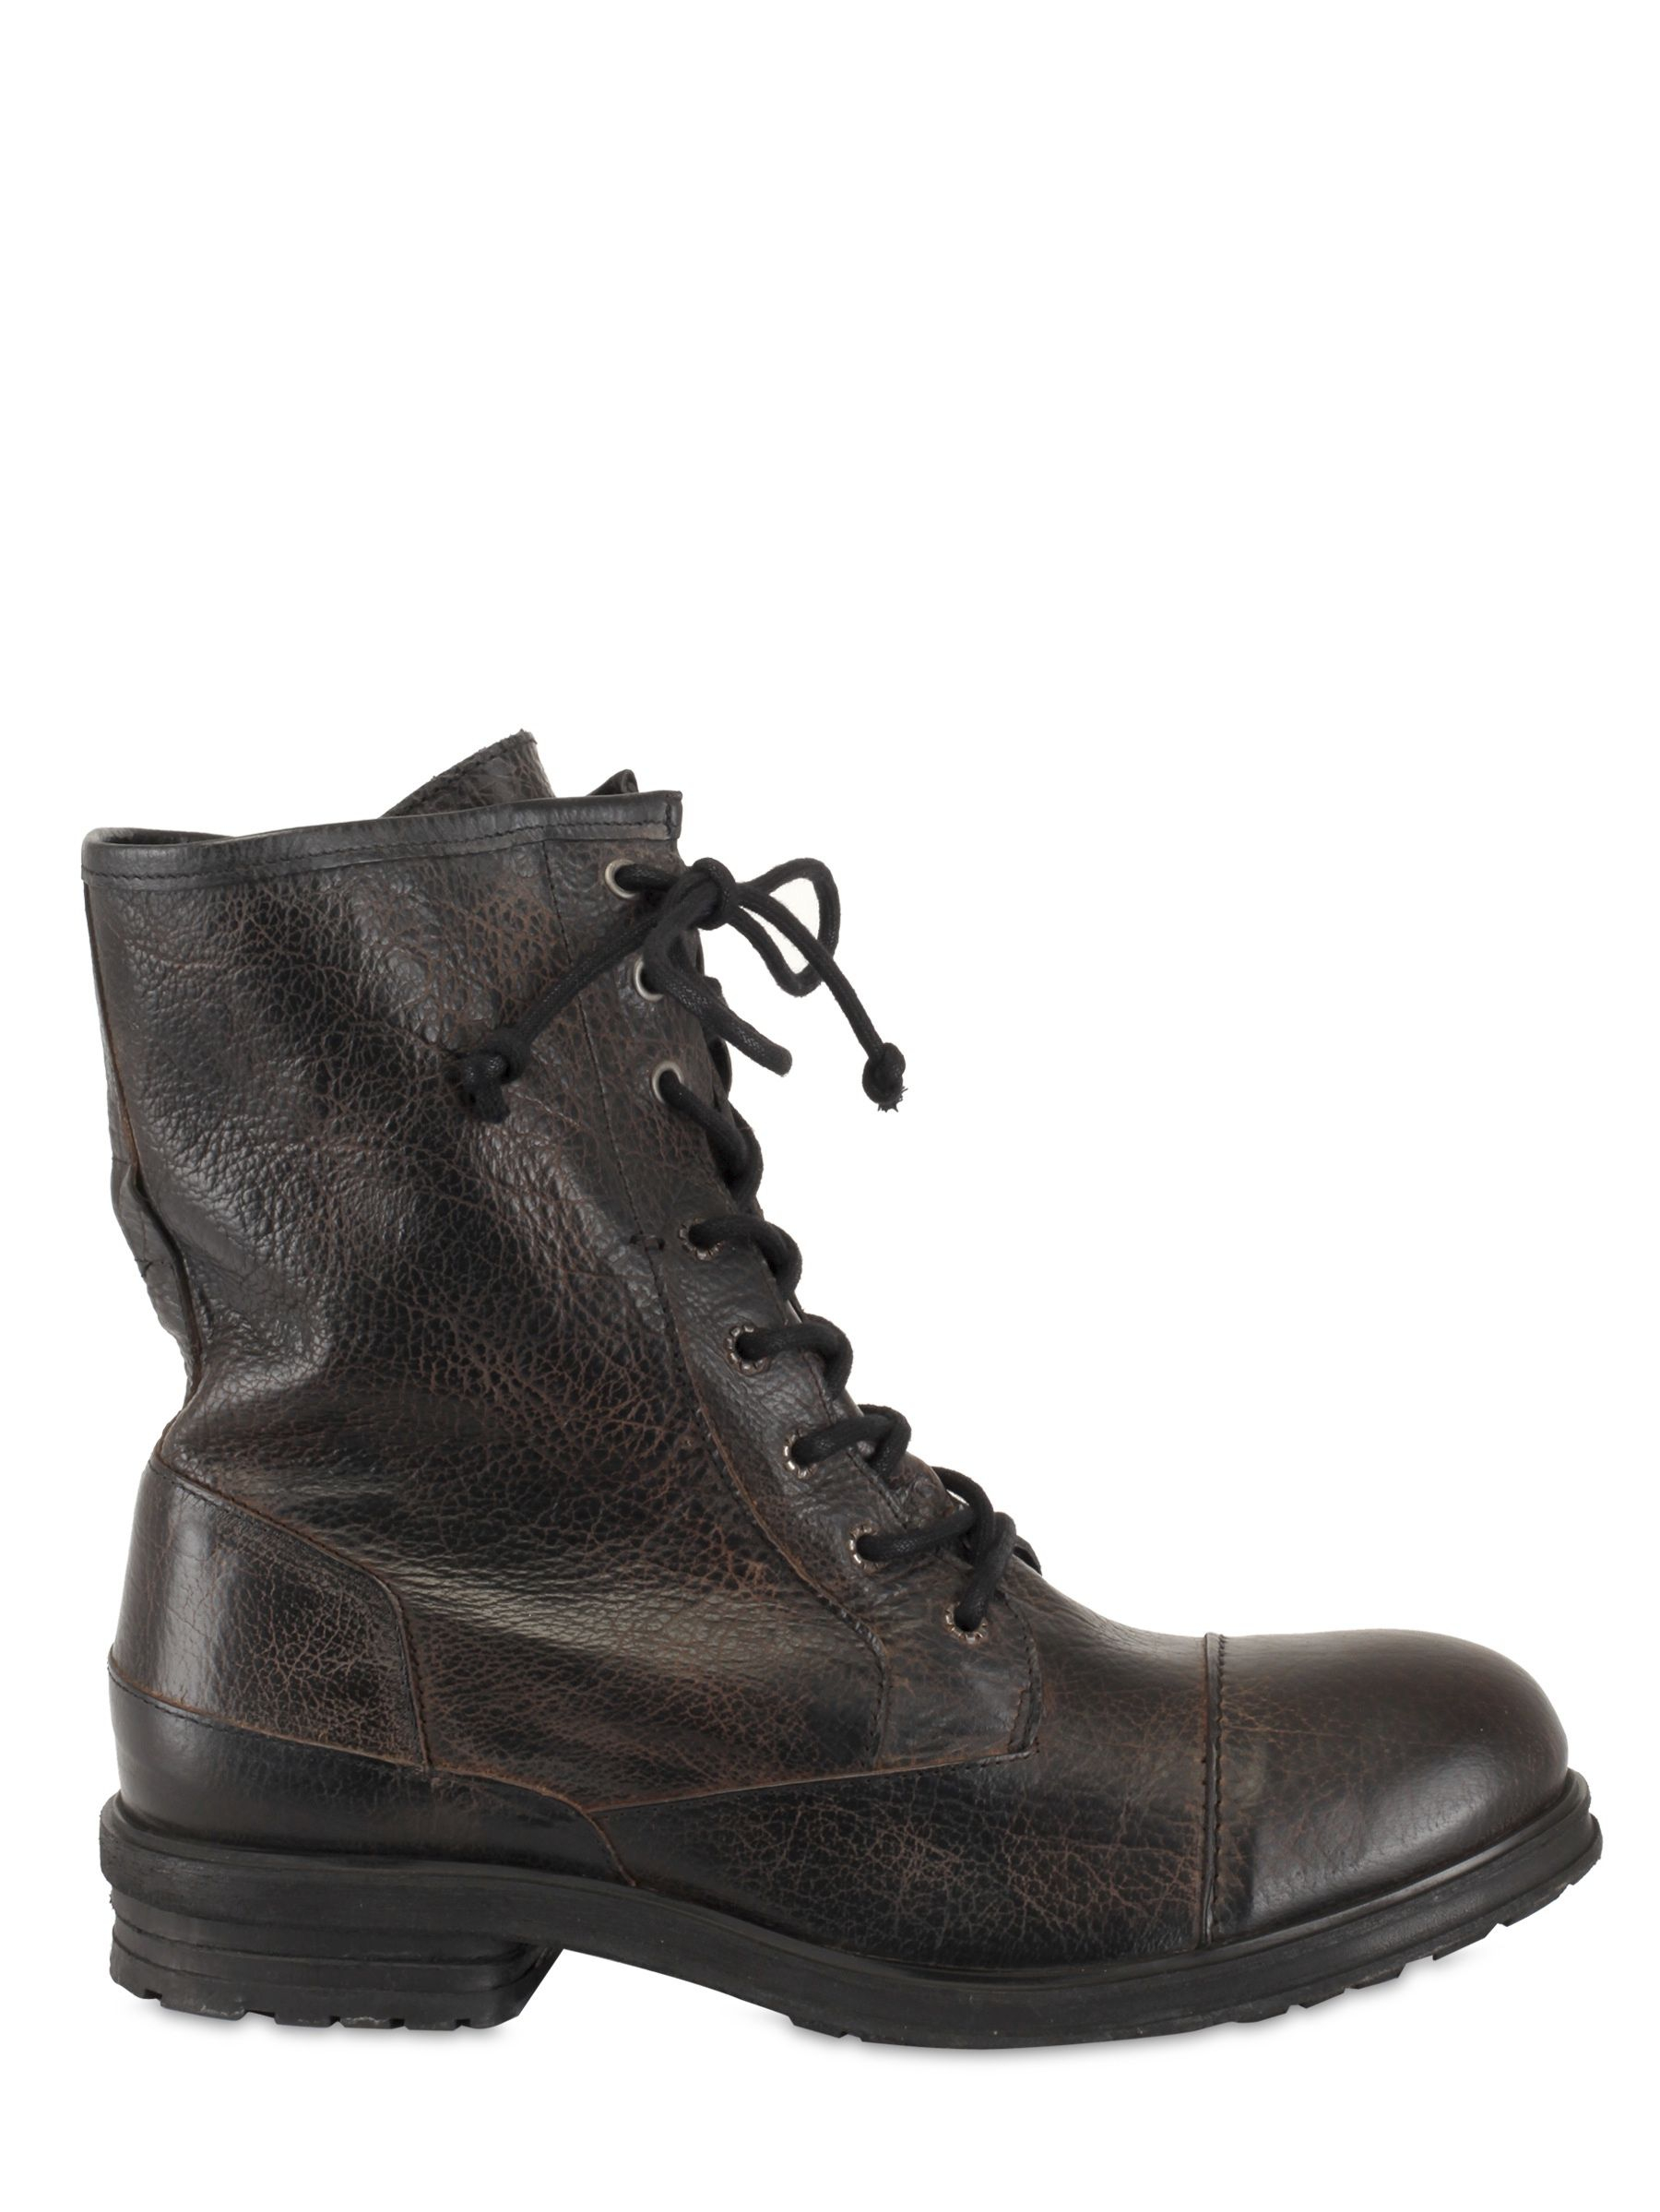 Lyst - Ksubi Textured Calfskin Lace Up Low Boots in Black for Men